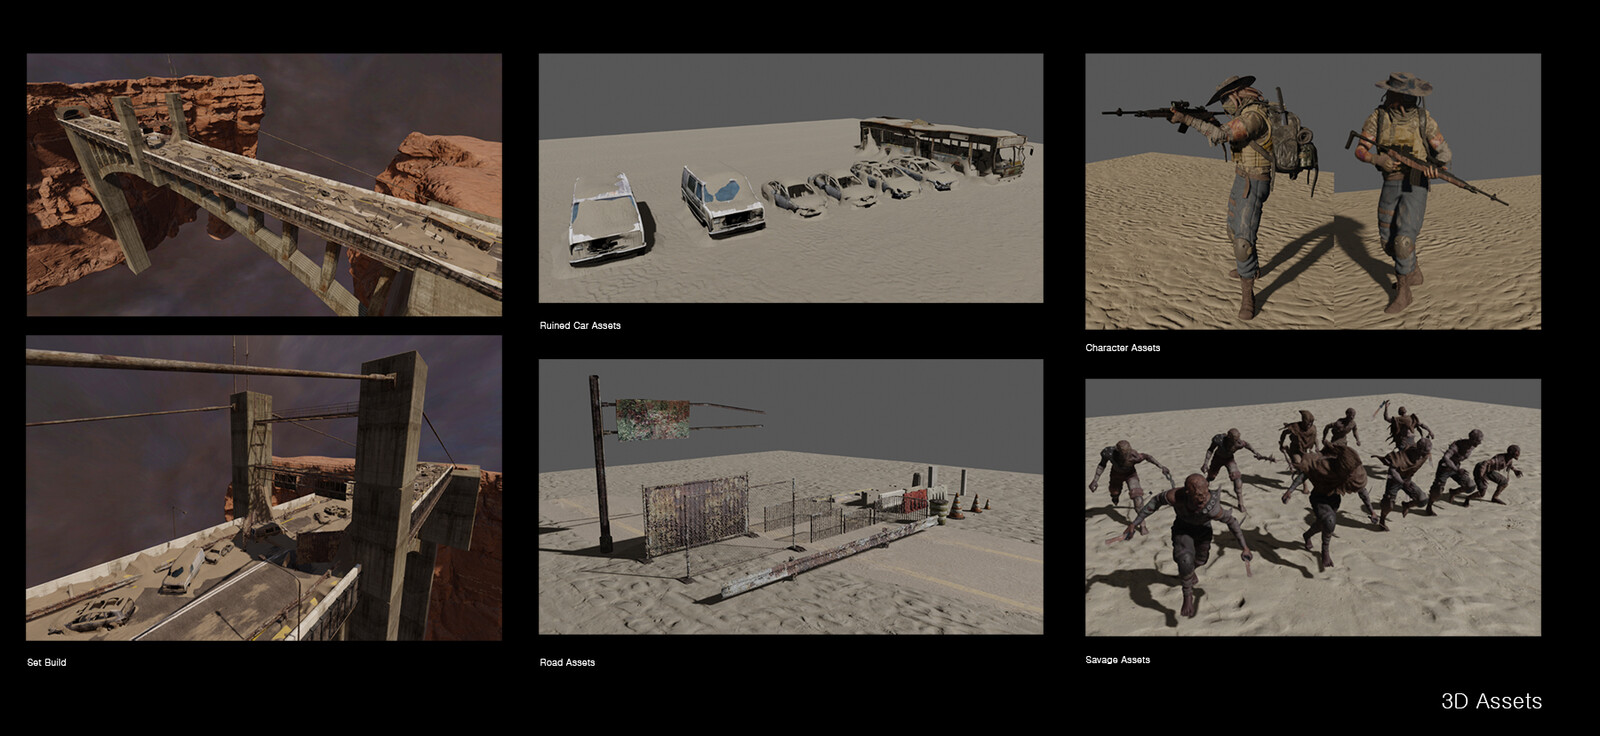 3D assets used in scenes